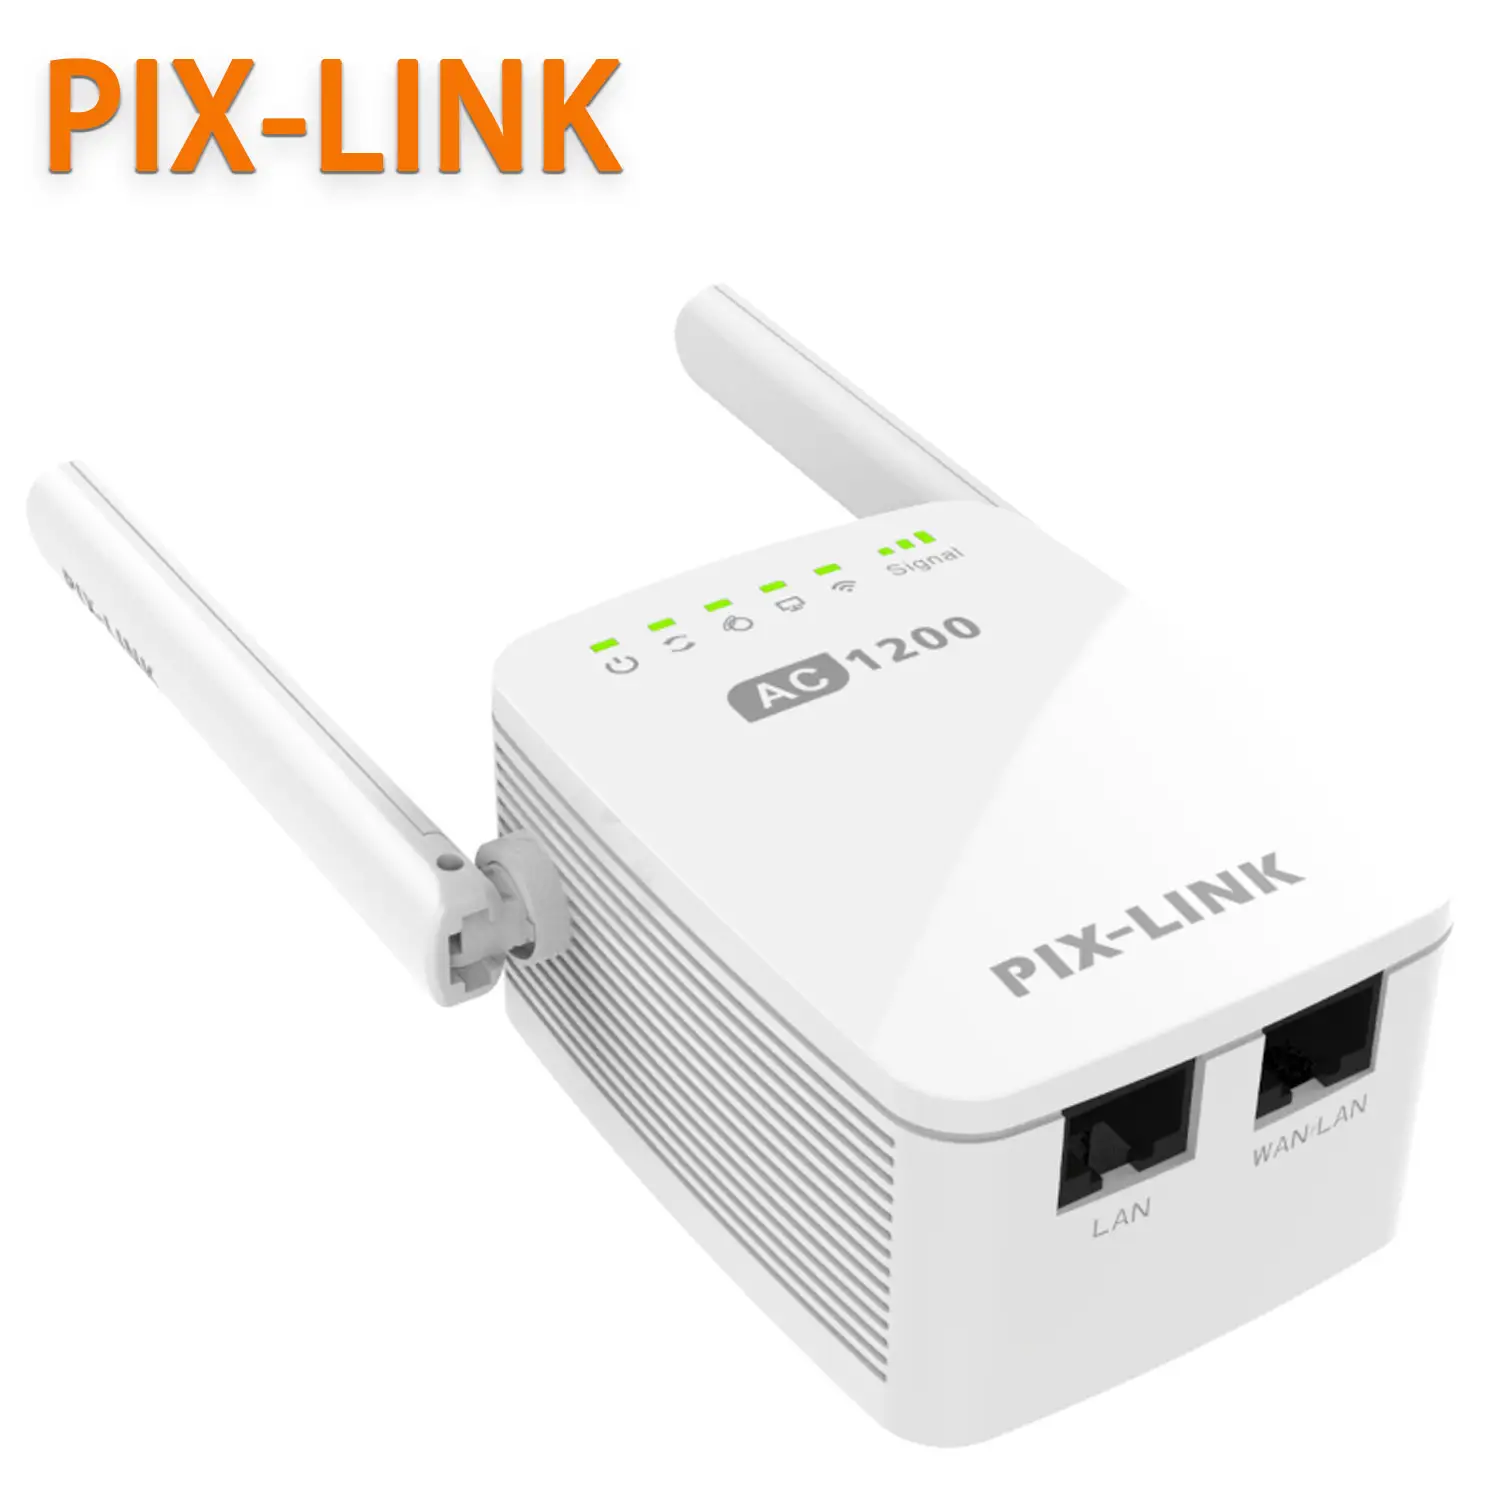 PIX-LINK Wireless 5G WiFi Repeater 1200Mbps Router Wifi Booster Dual Band Long Range Extender 5Ghz Wi-Fi Signal Amplifier Repeater